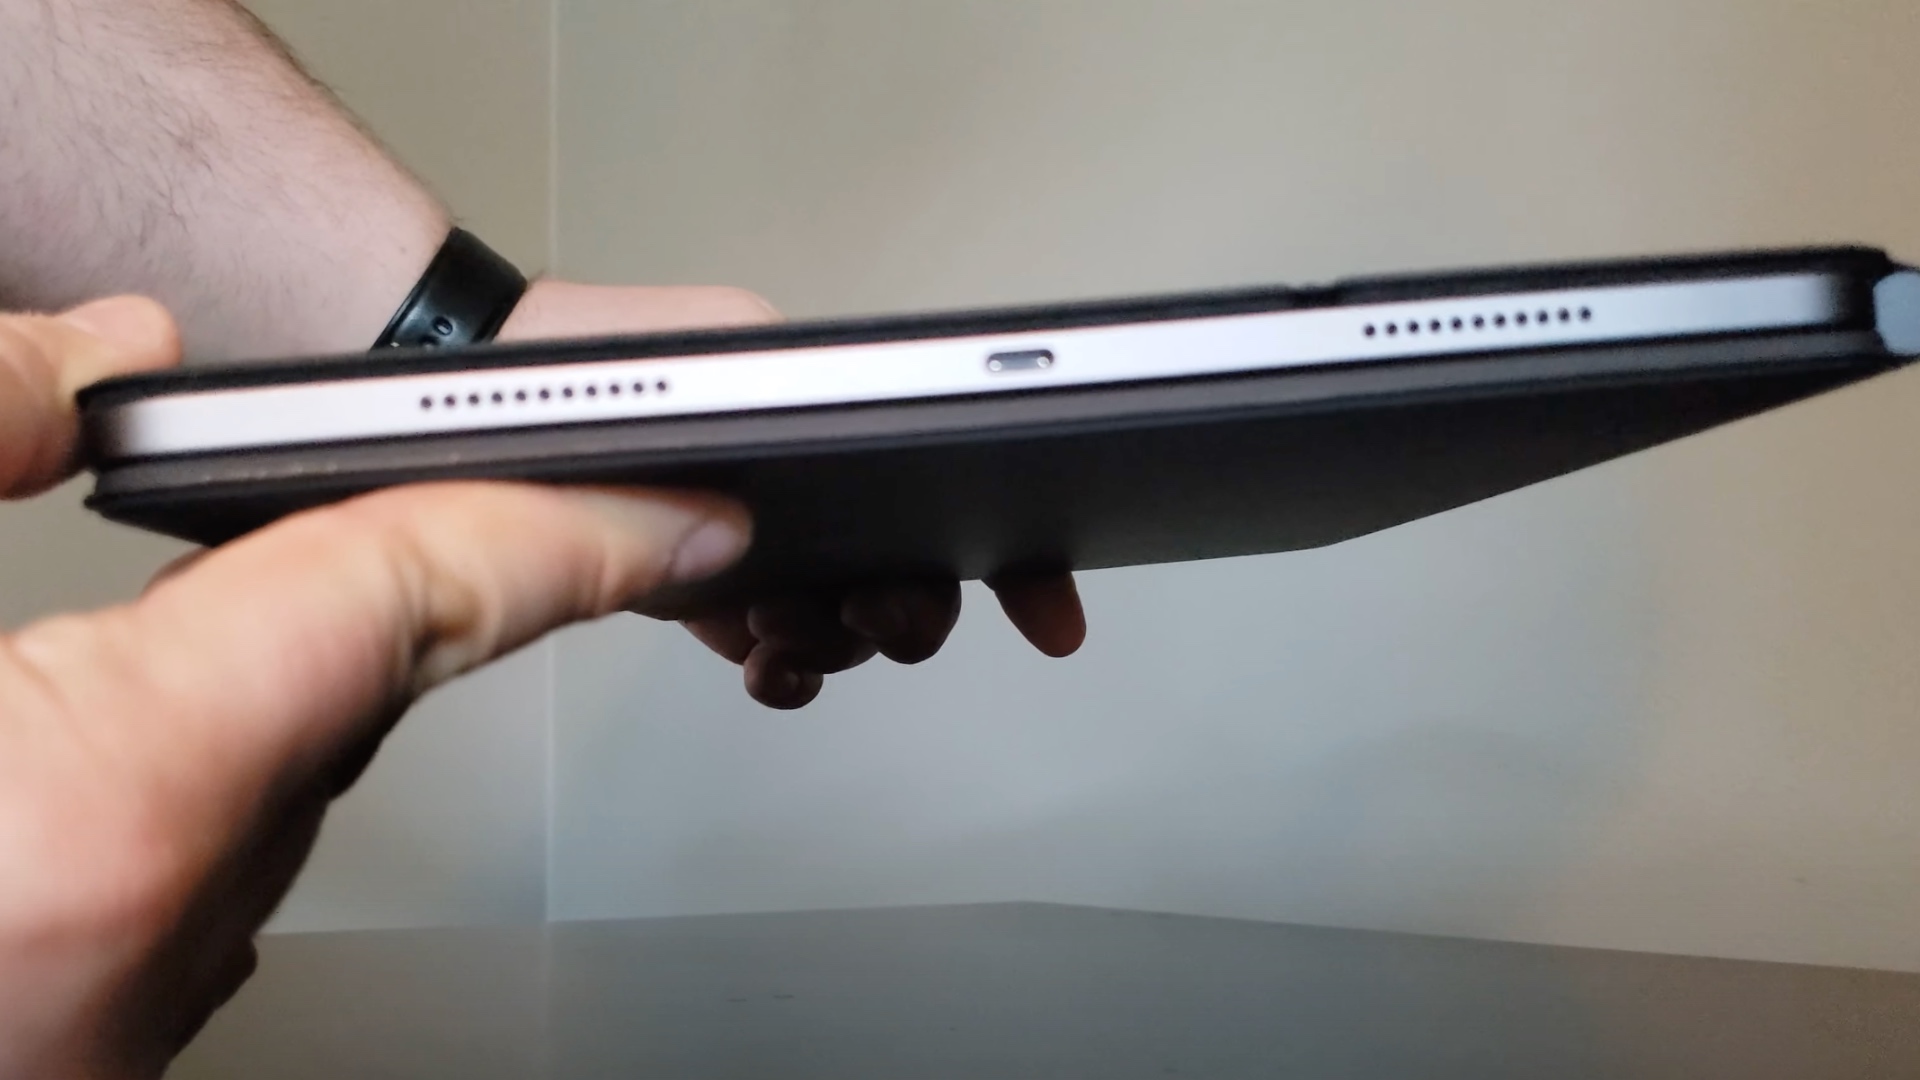 Video details compatibility between 2020 Magic Keyboard and 12.9-inch M1 iPad Pro